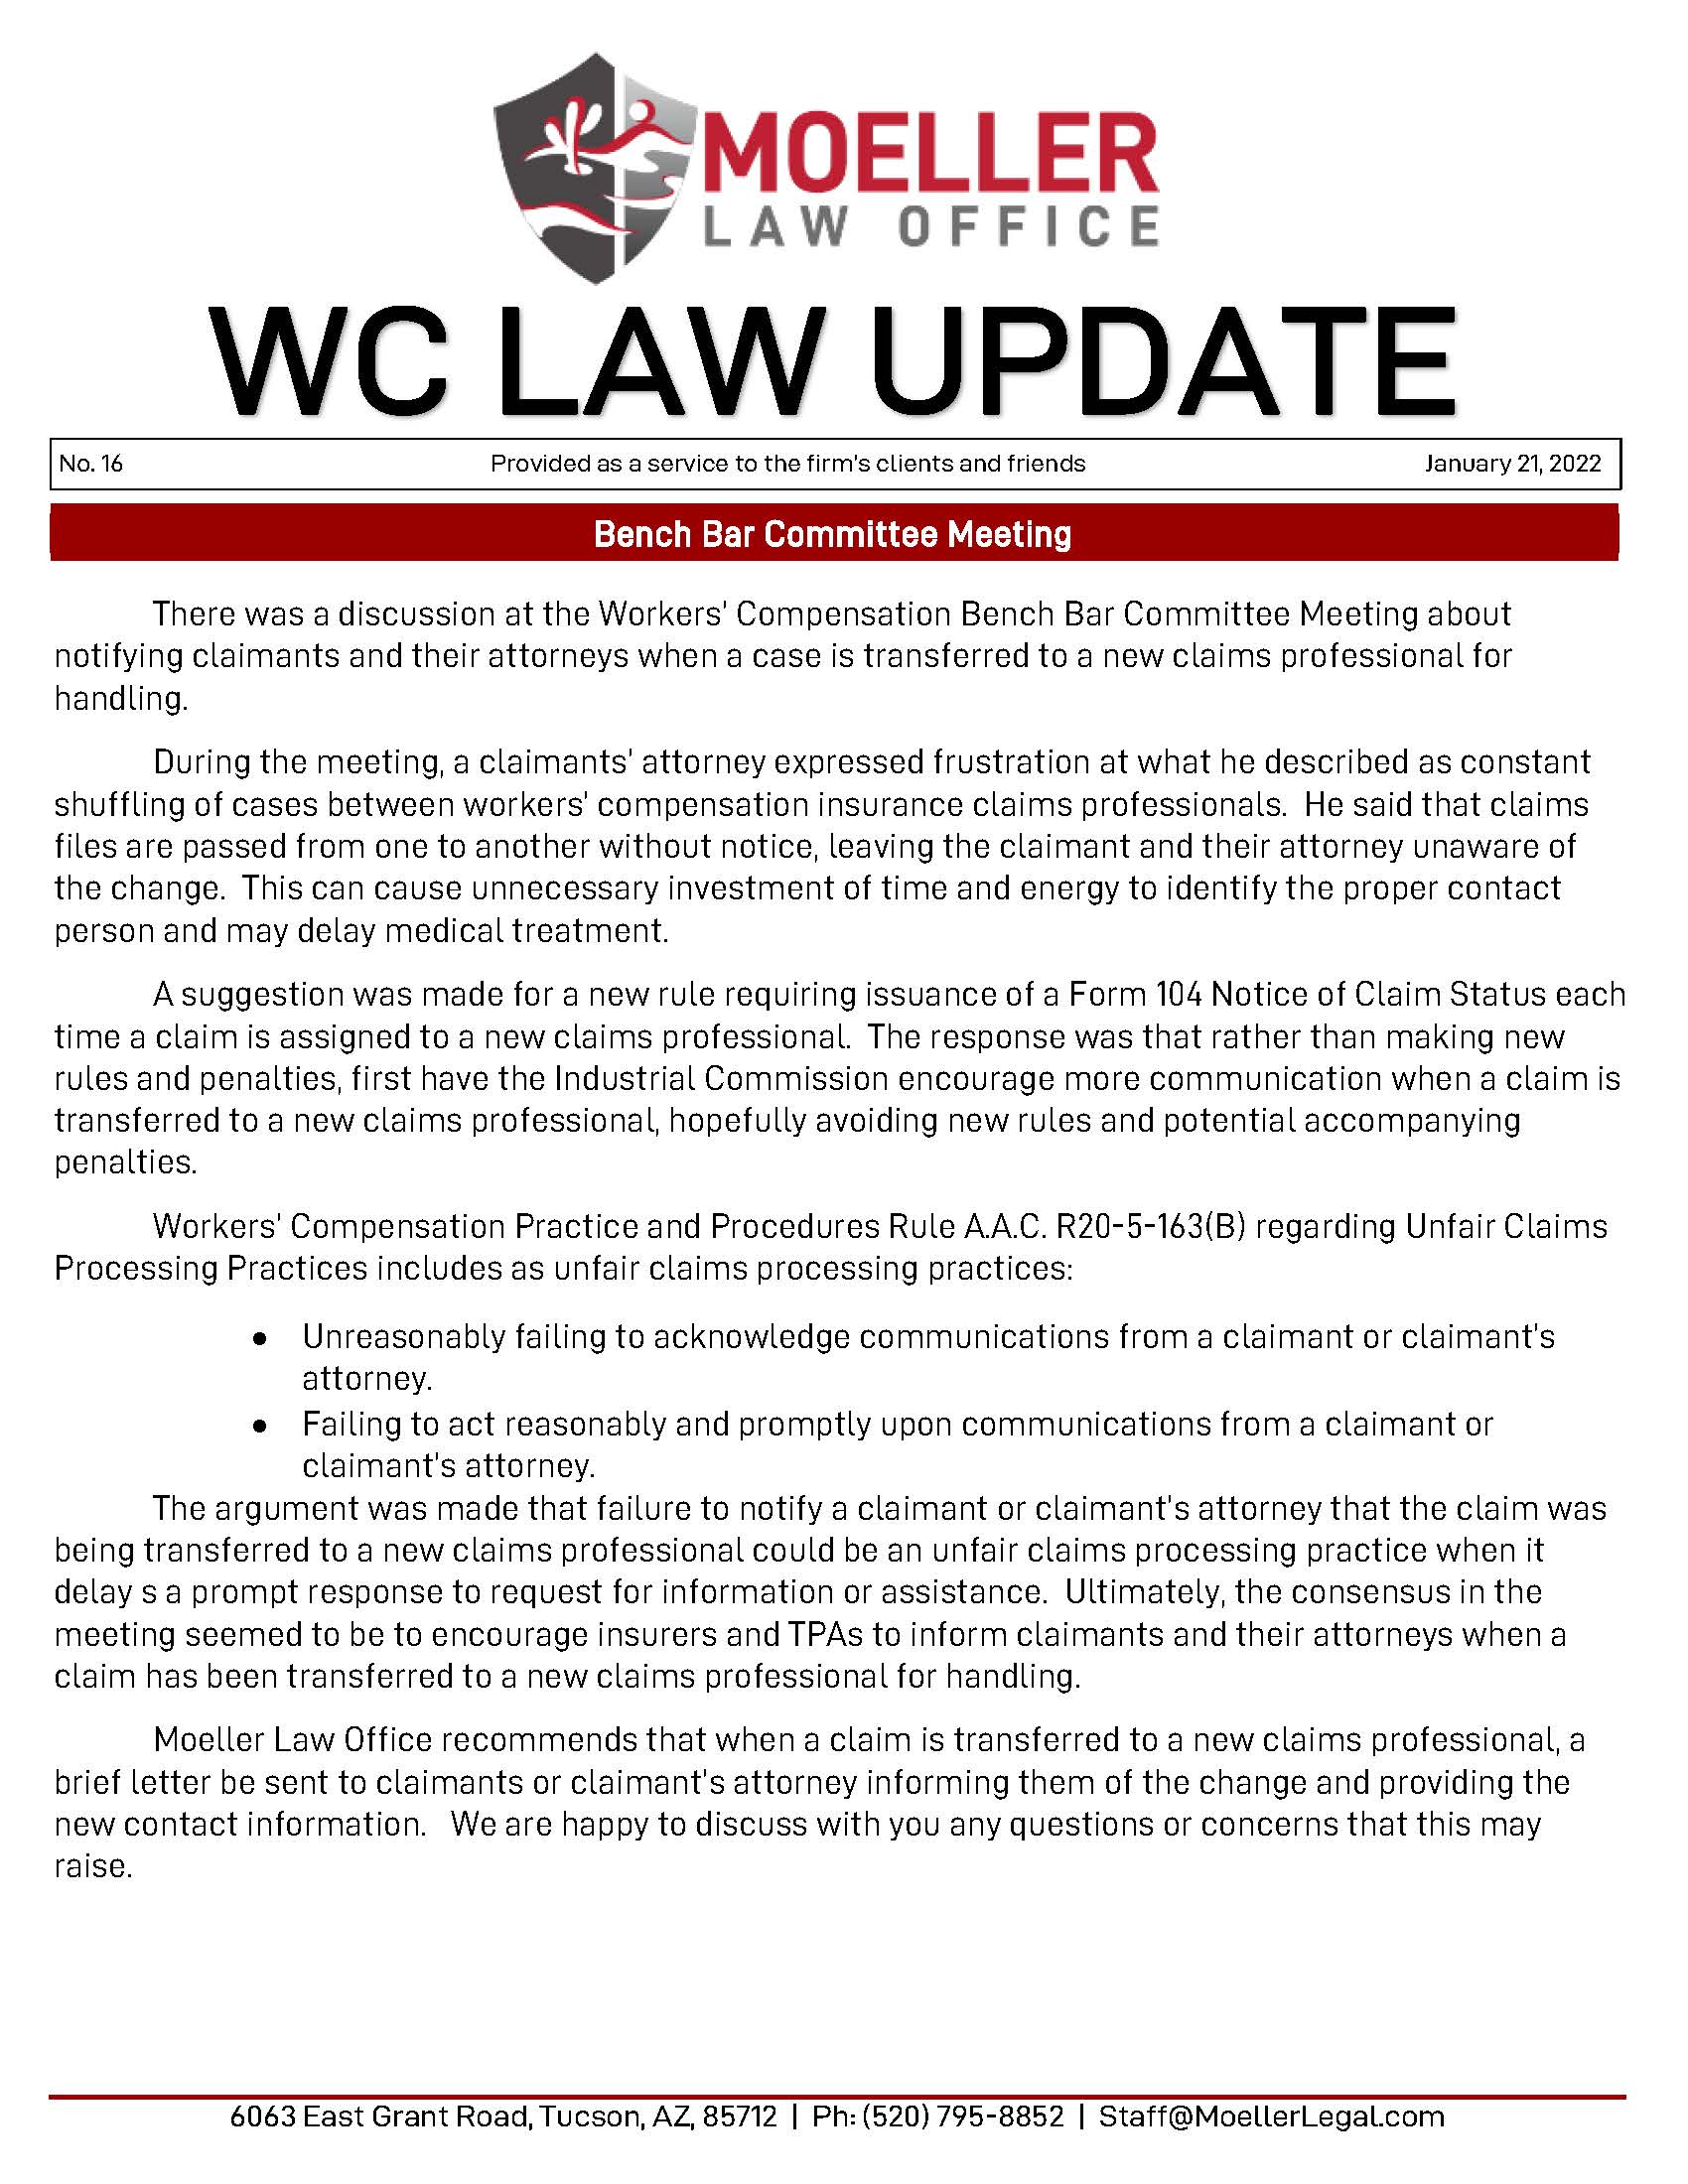 2022 01 21 – No. 16 – WC Law Update – Bench Bar Committee Meeting